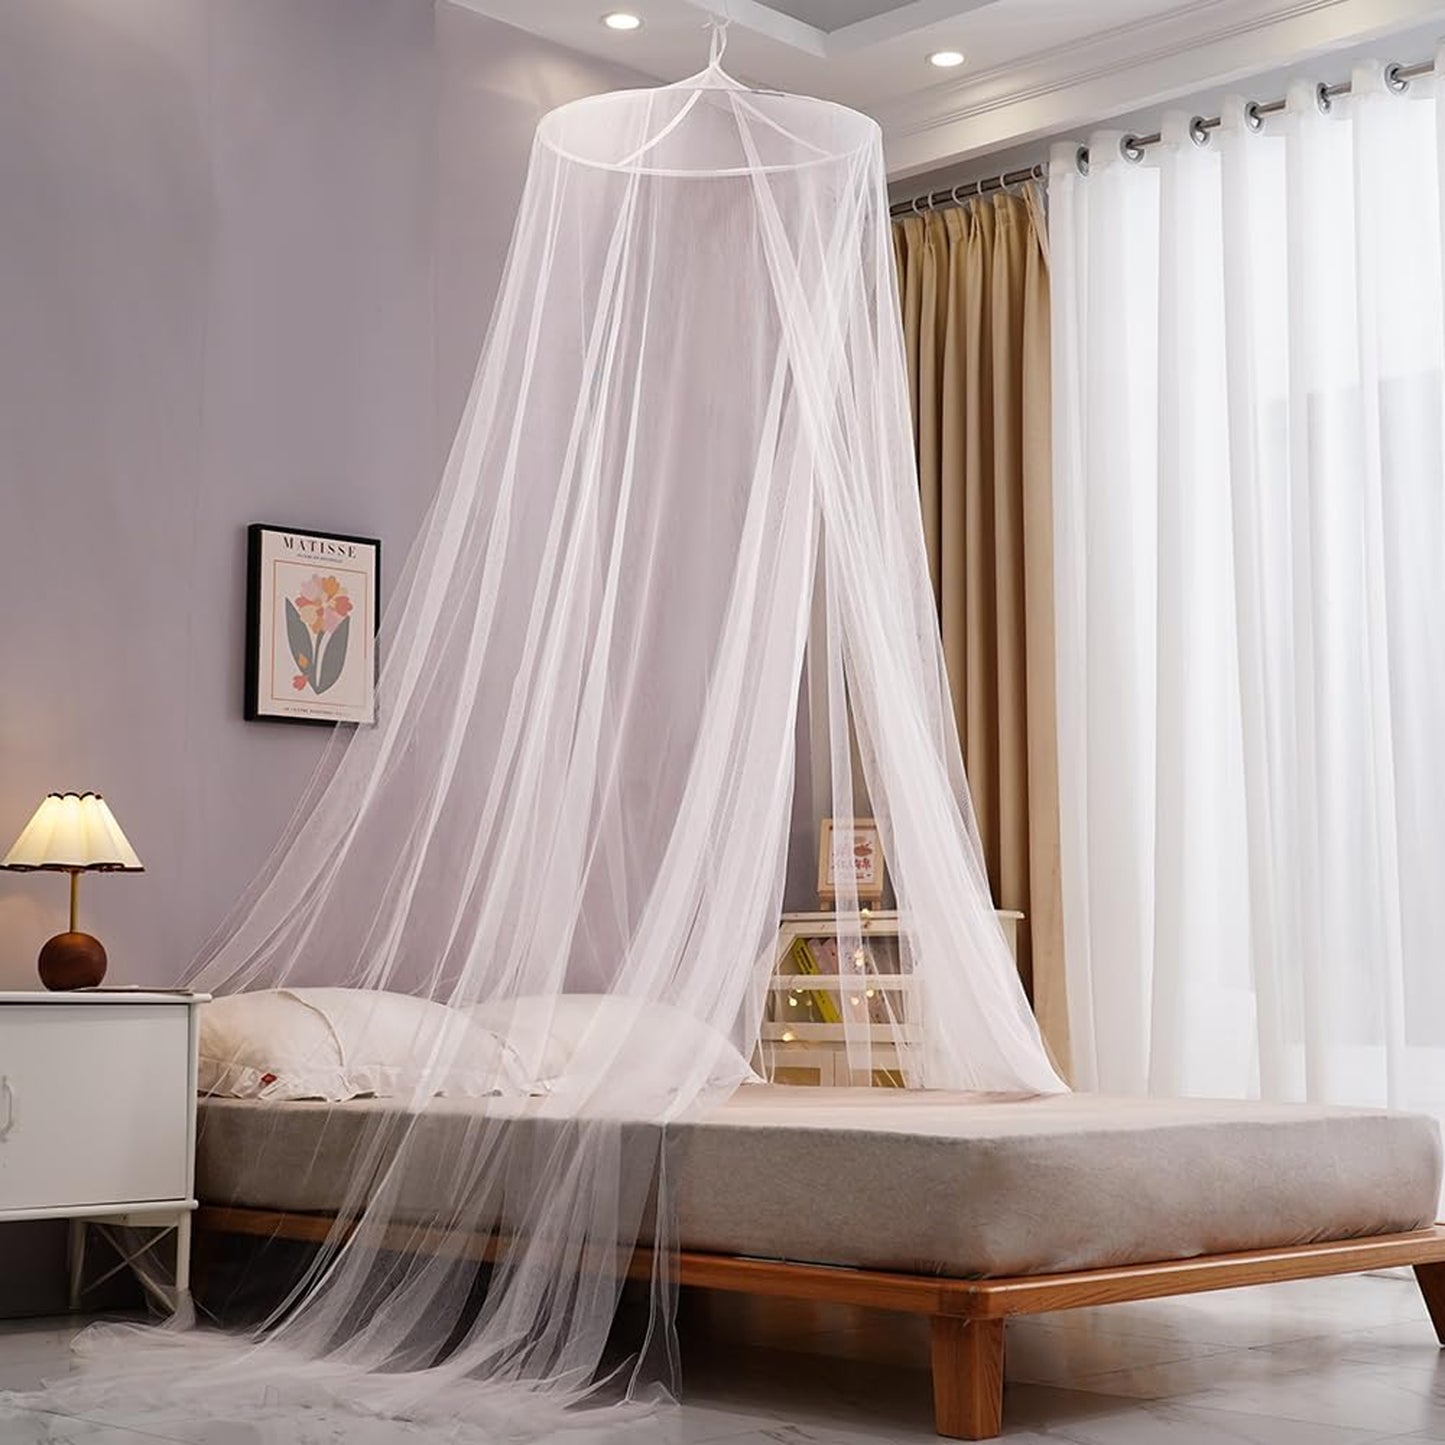 Mosquito Net, Mesh Bed Canopy Fit Twin to Full Bed, White